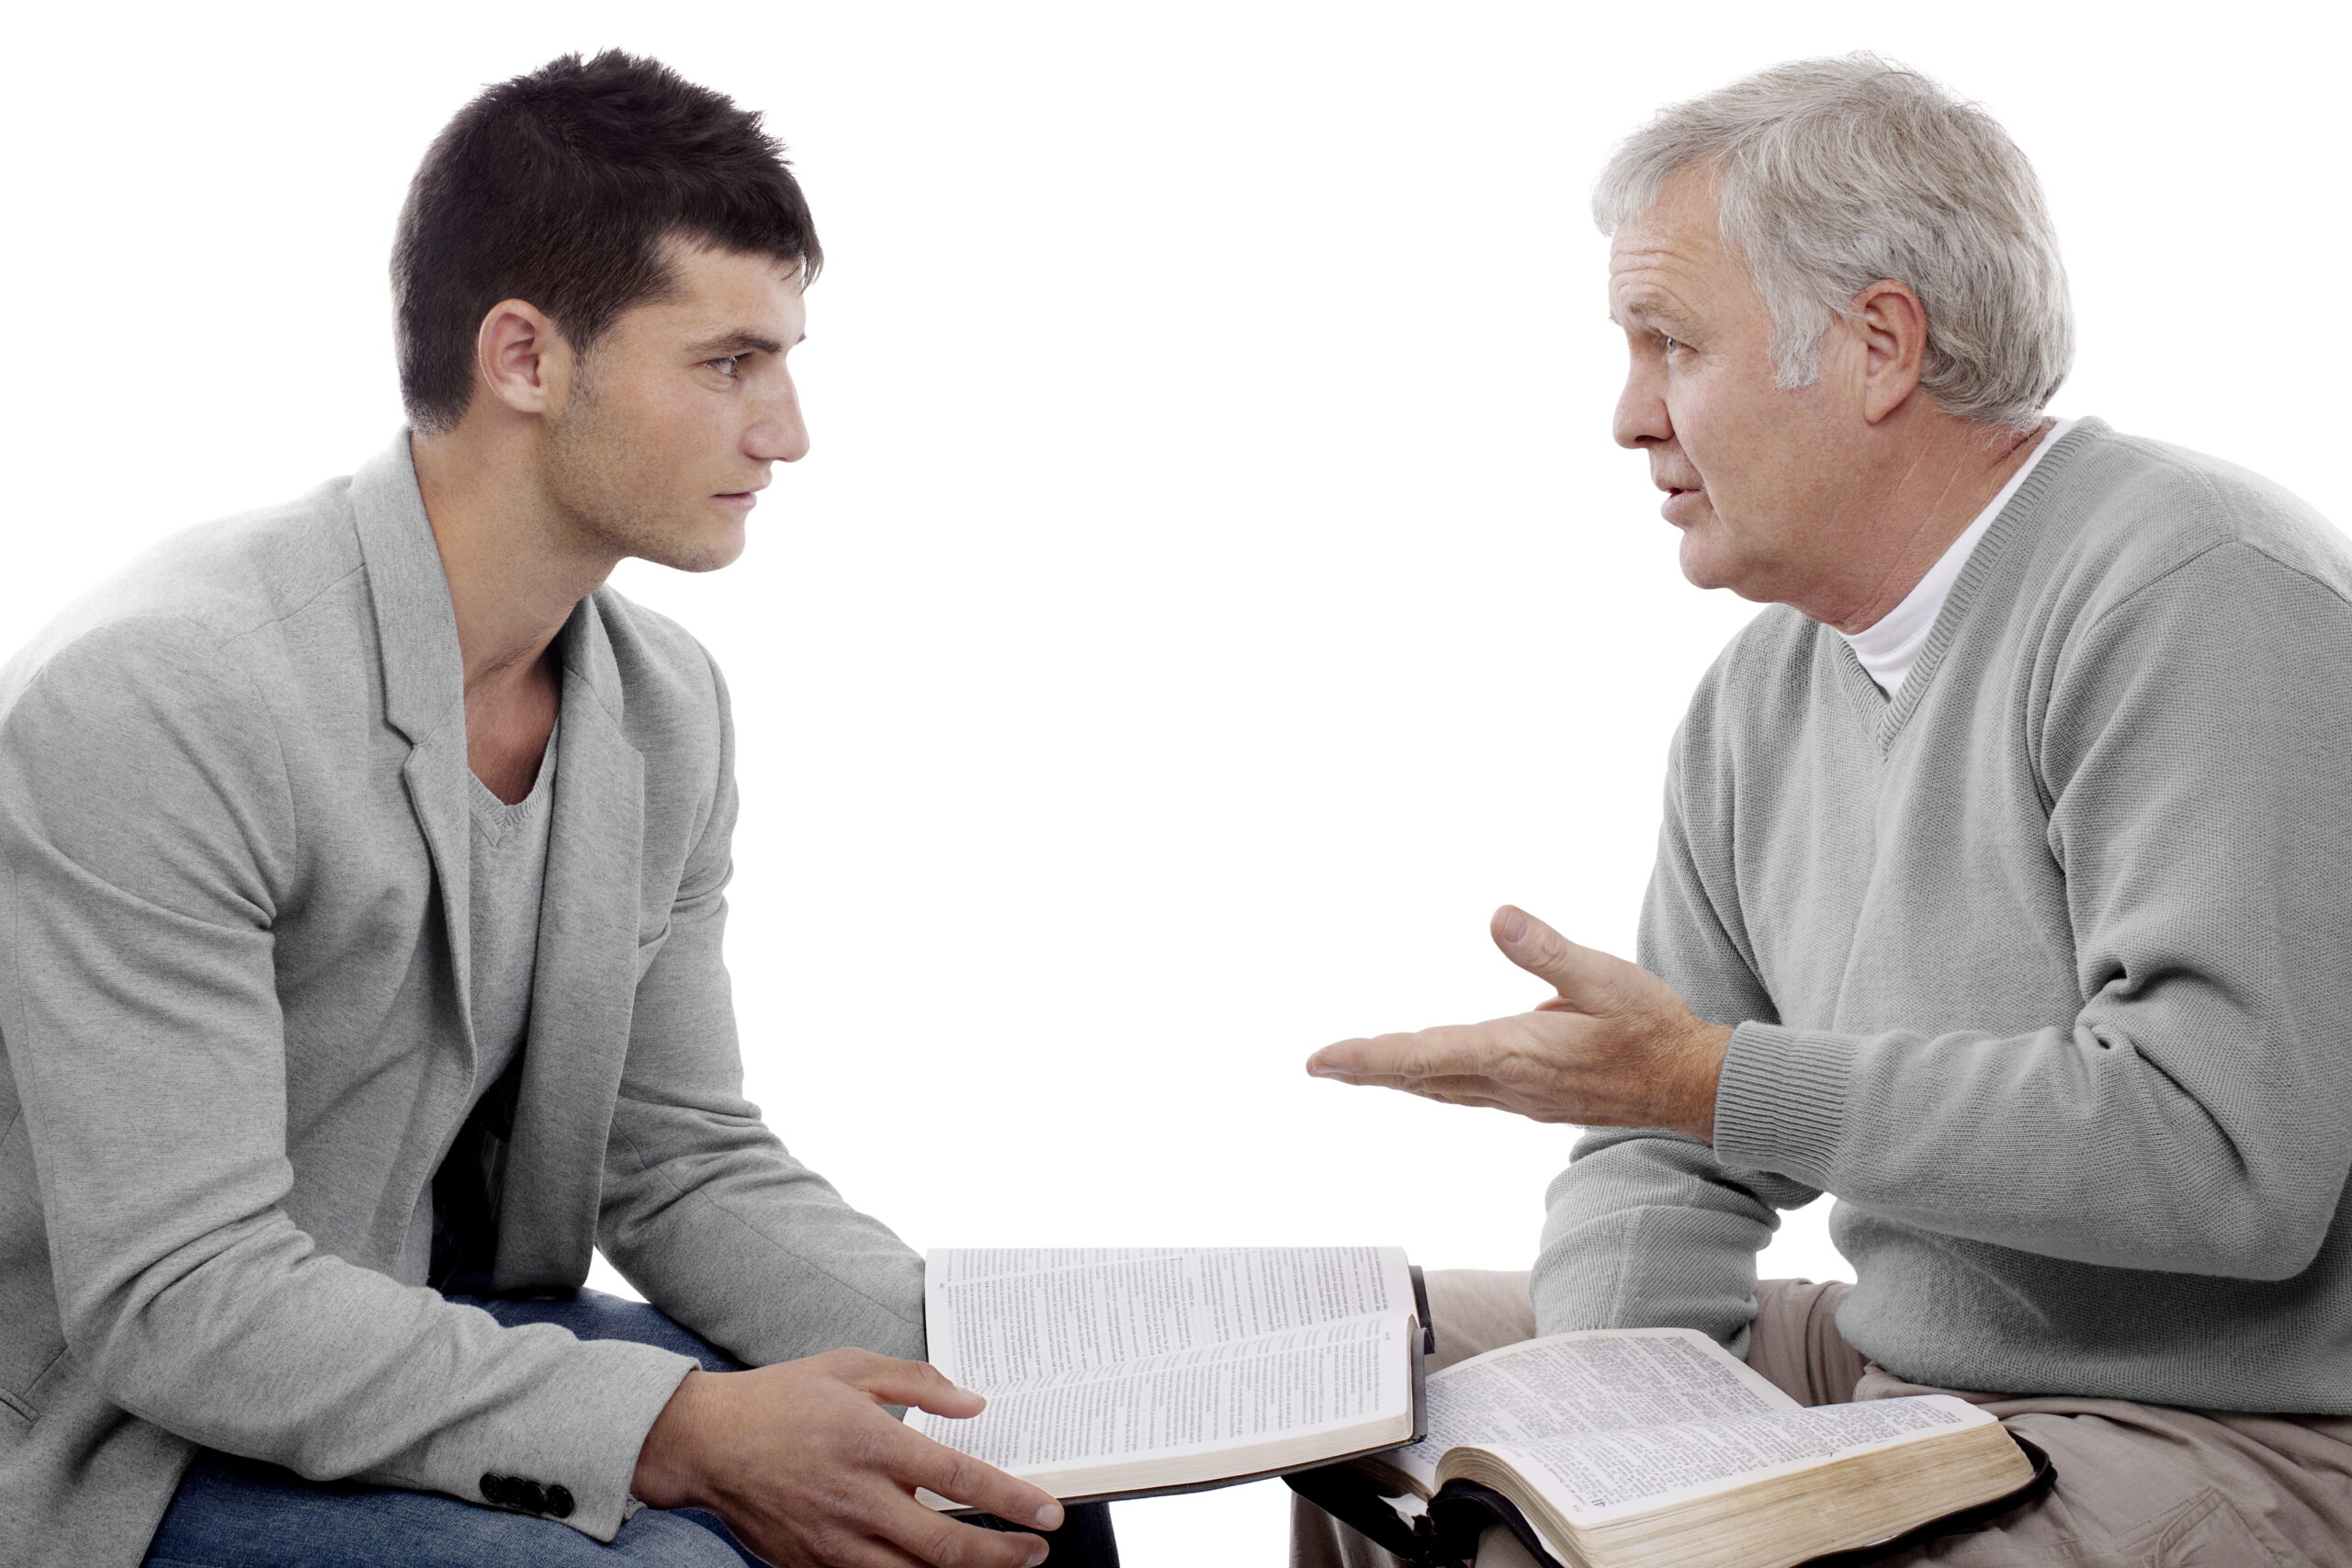 Believer explains God's Words to a young man